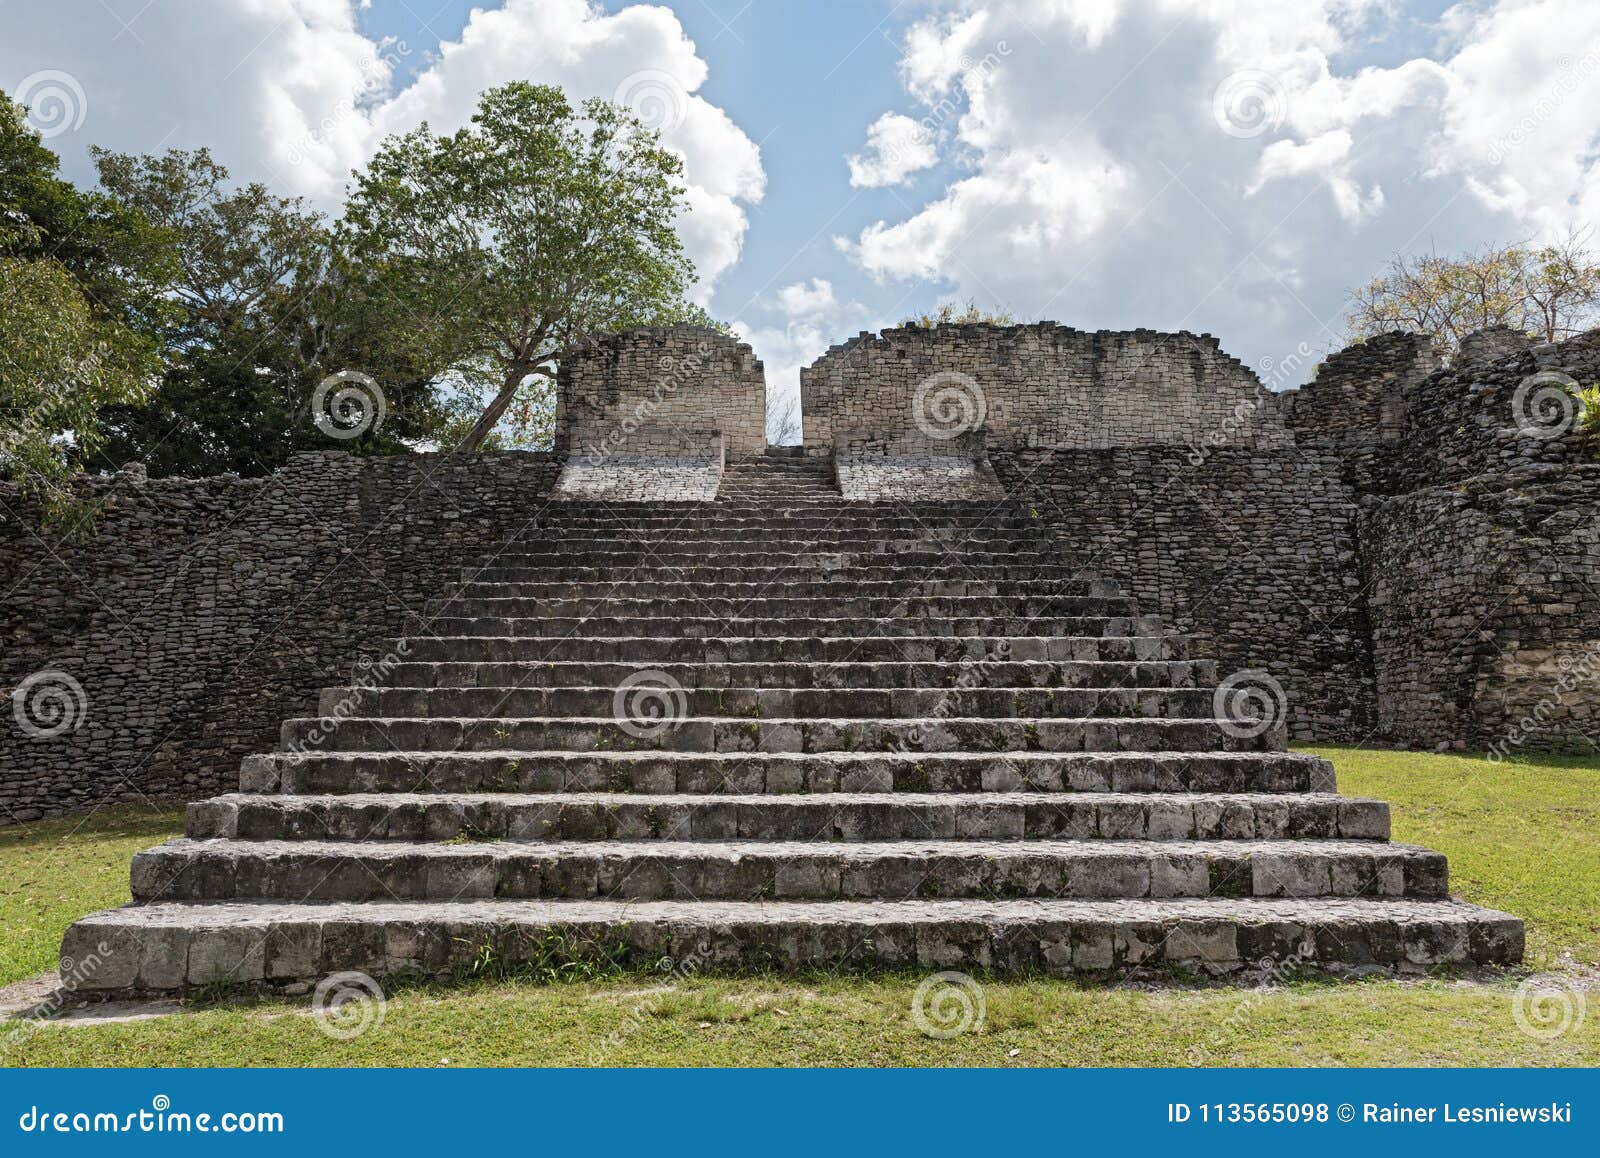 the ruins of the ancient mayan city of kohunlich, quintana roo, mexico